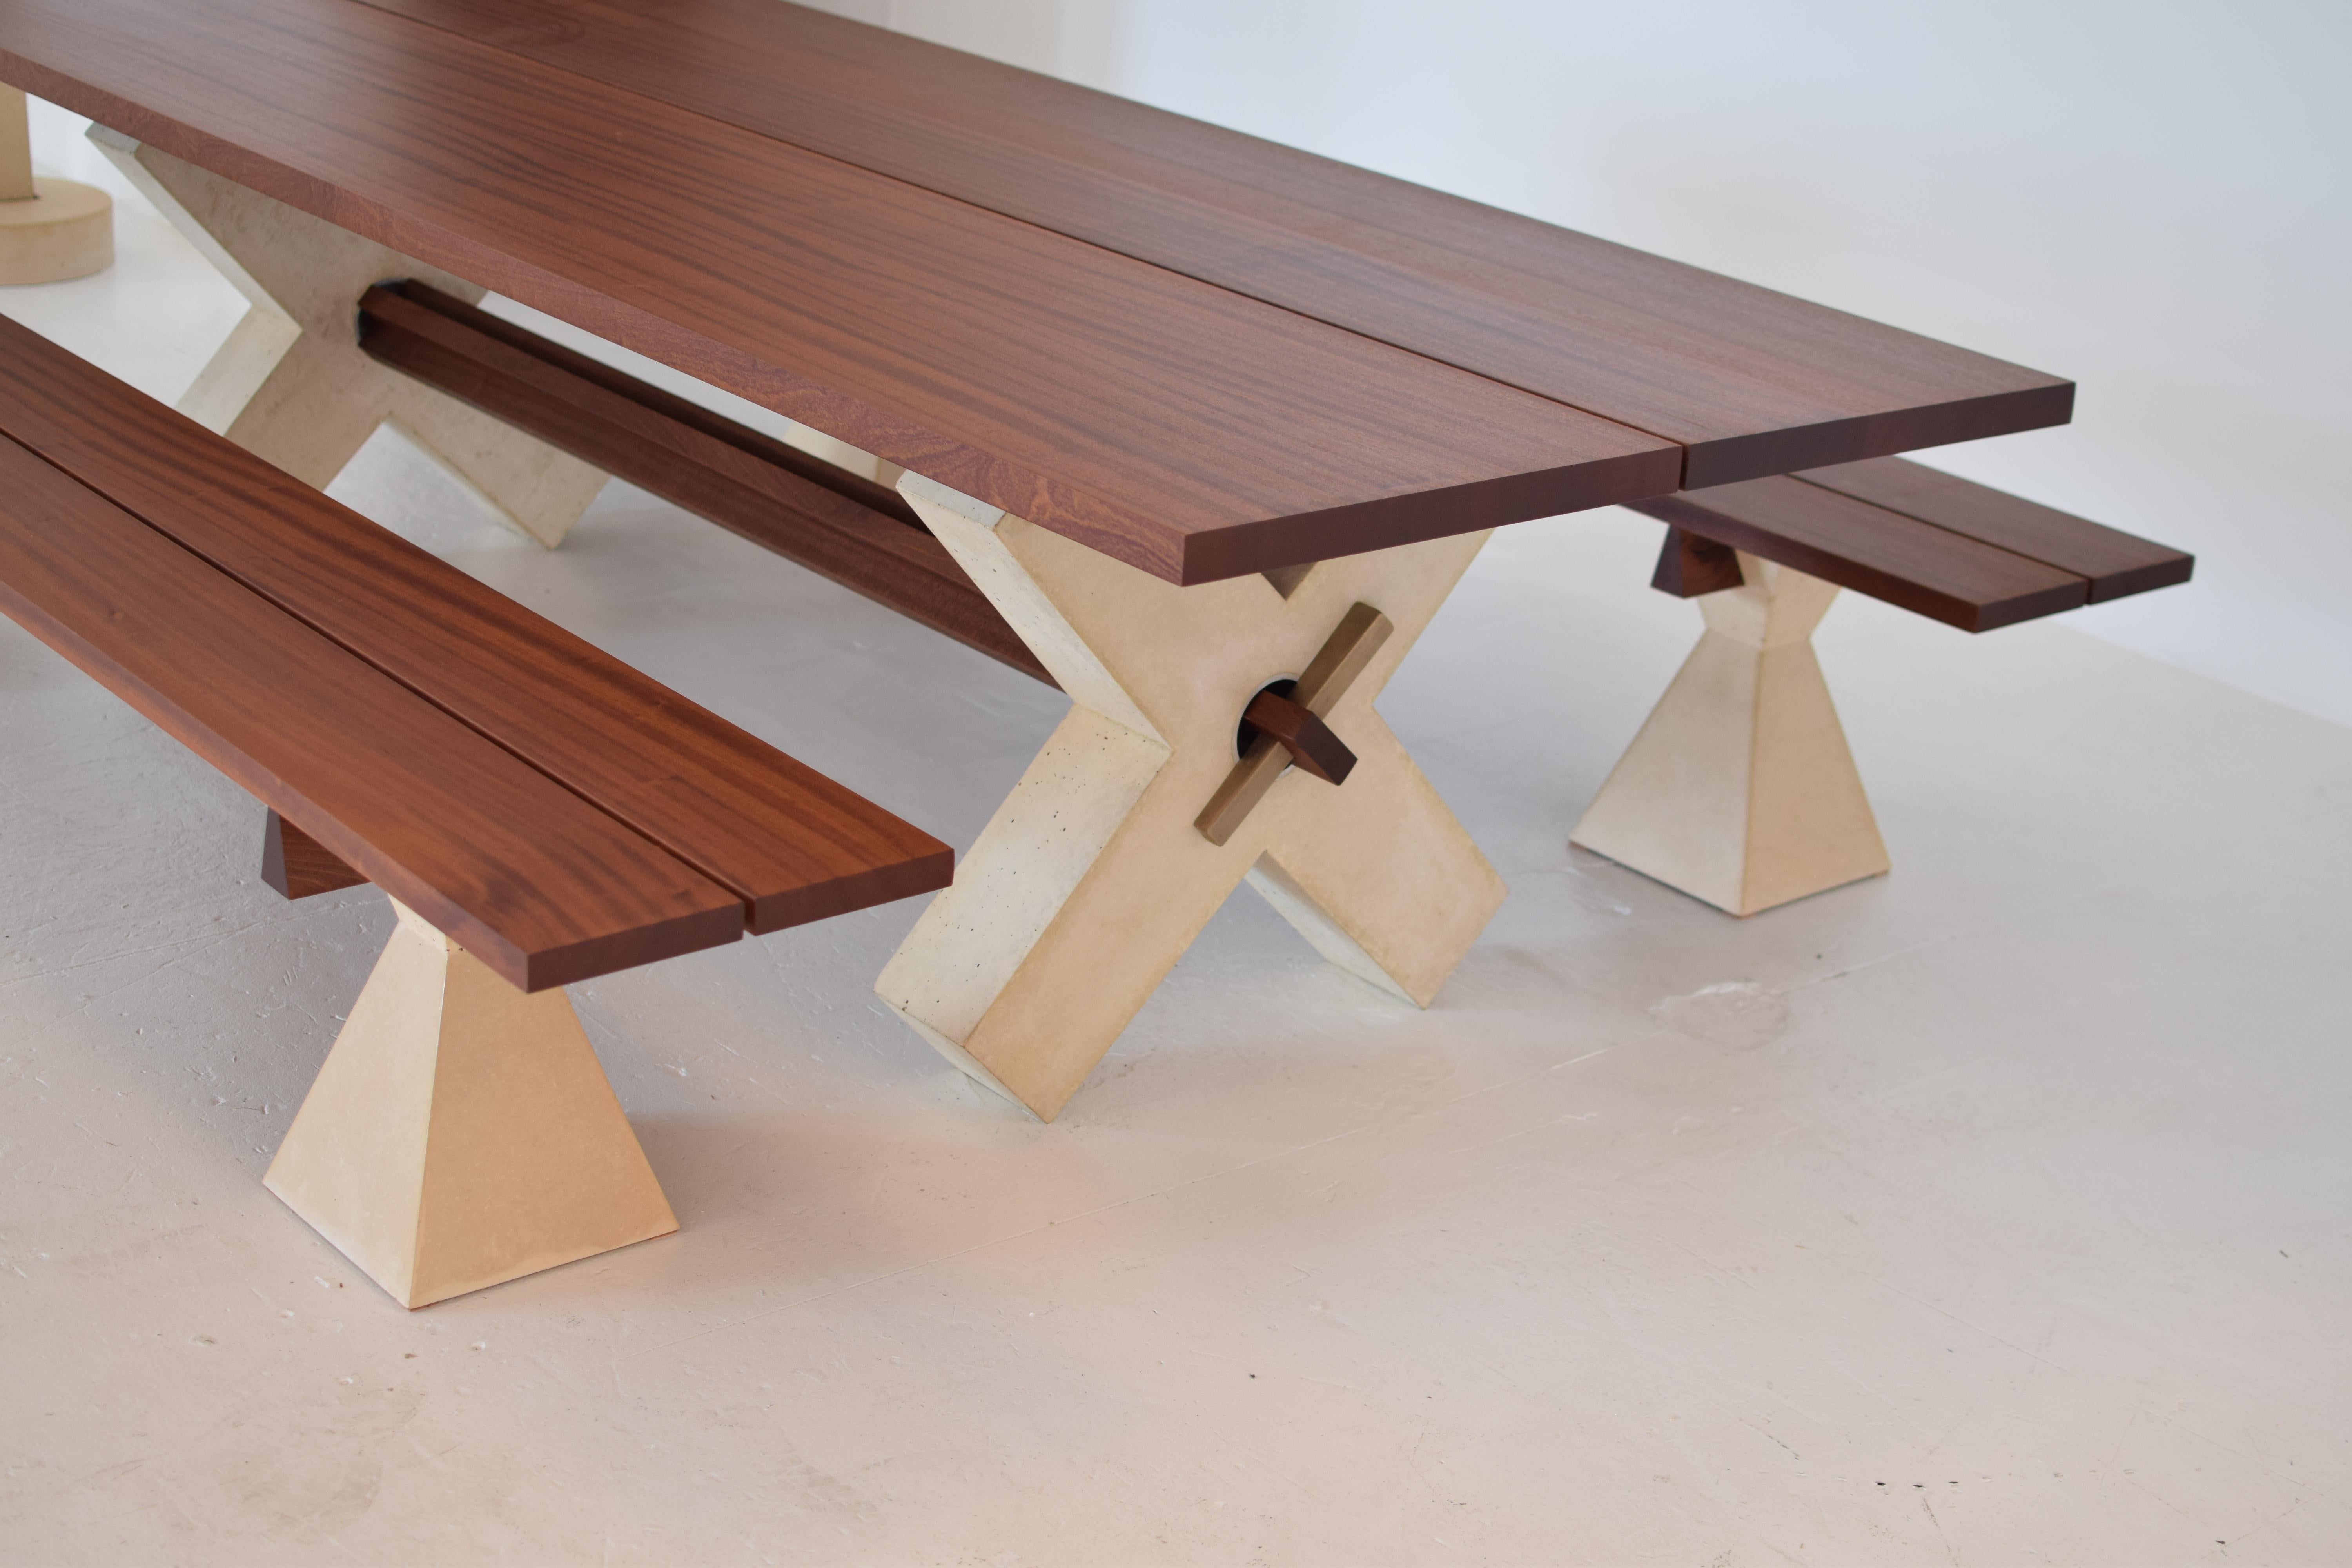 X dining table
This substantial wooden top and monument X base make for a grand dining experience. Poux’s use of cast concrete commands attention, this time with the addition of his two-piece tabletop and wood trestle beam that connects the